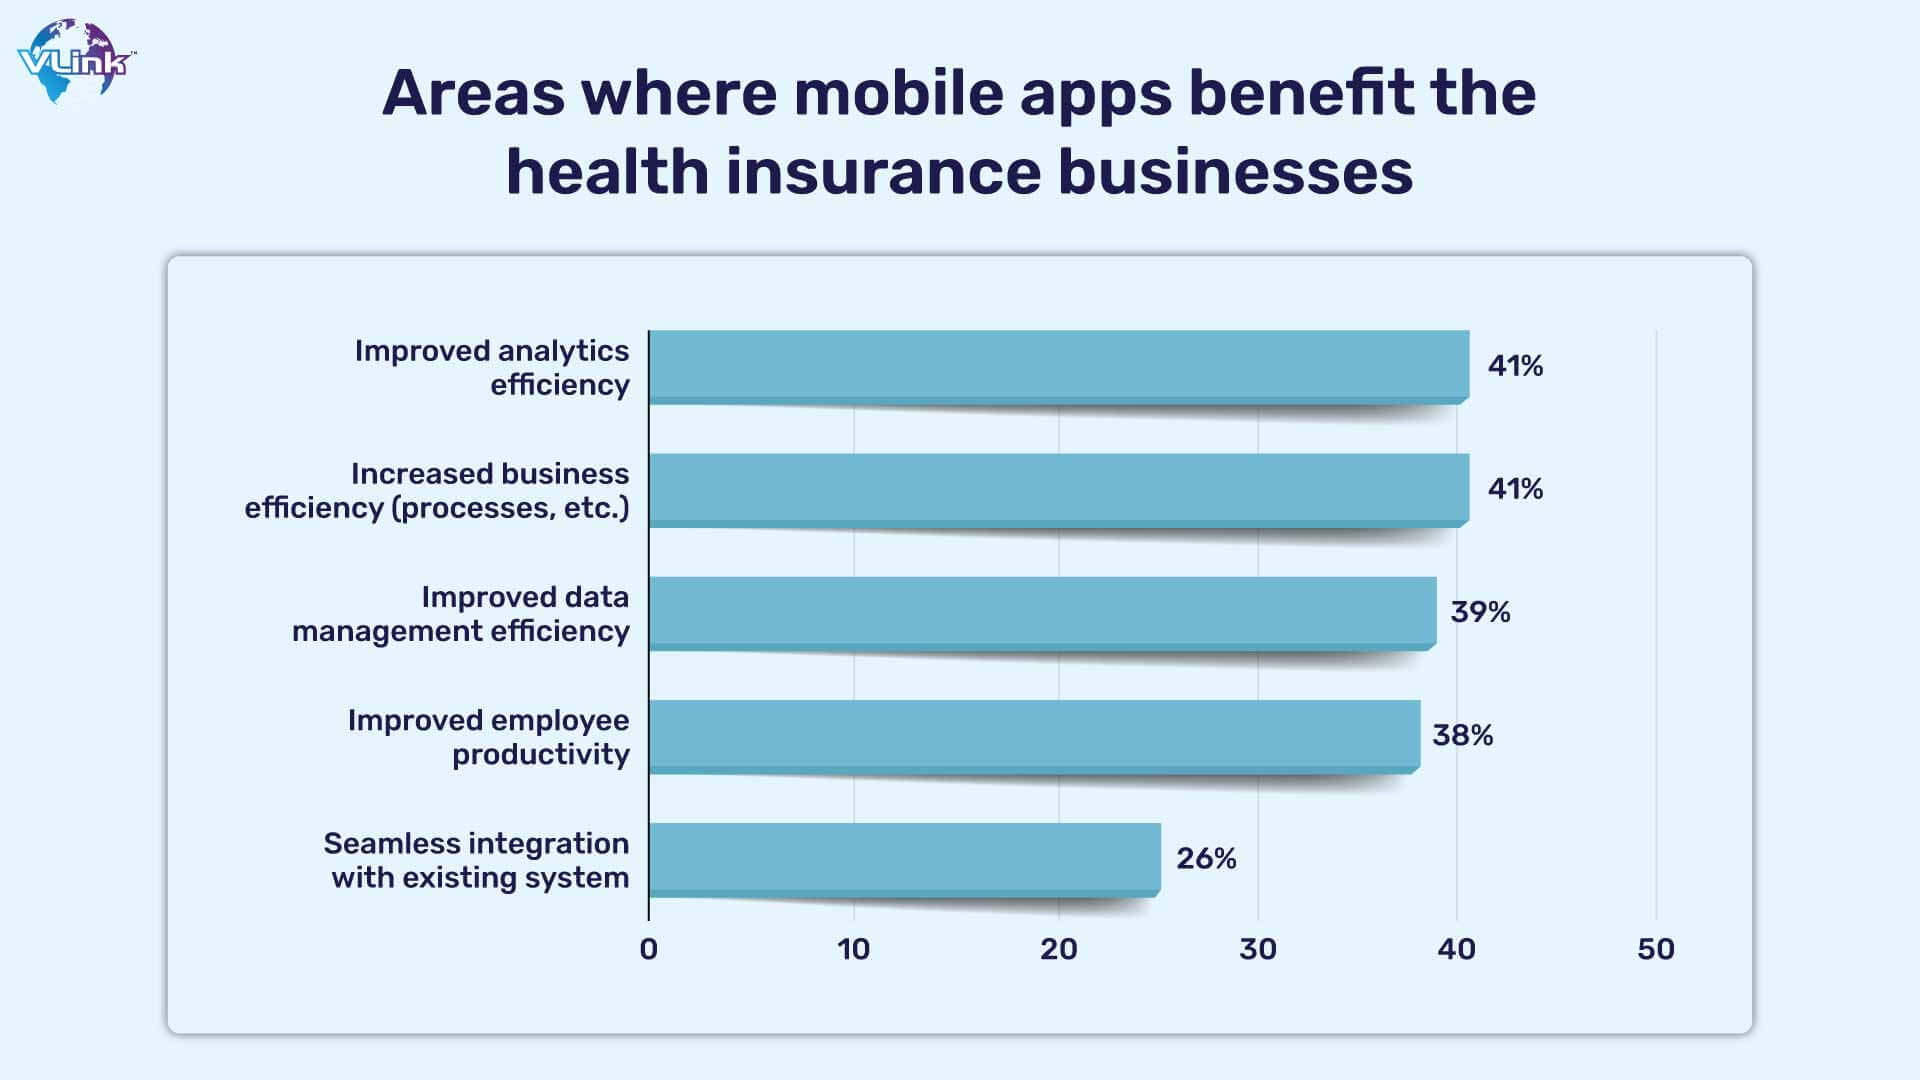 Areas where mobile apps benefit the health insurance businesses